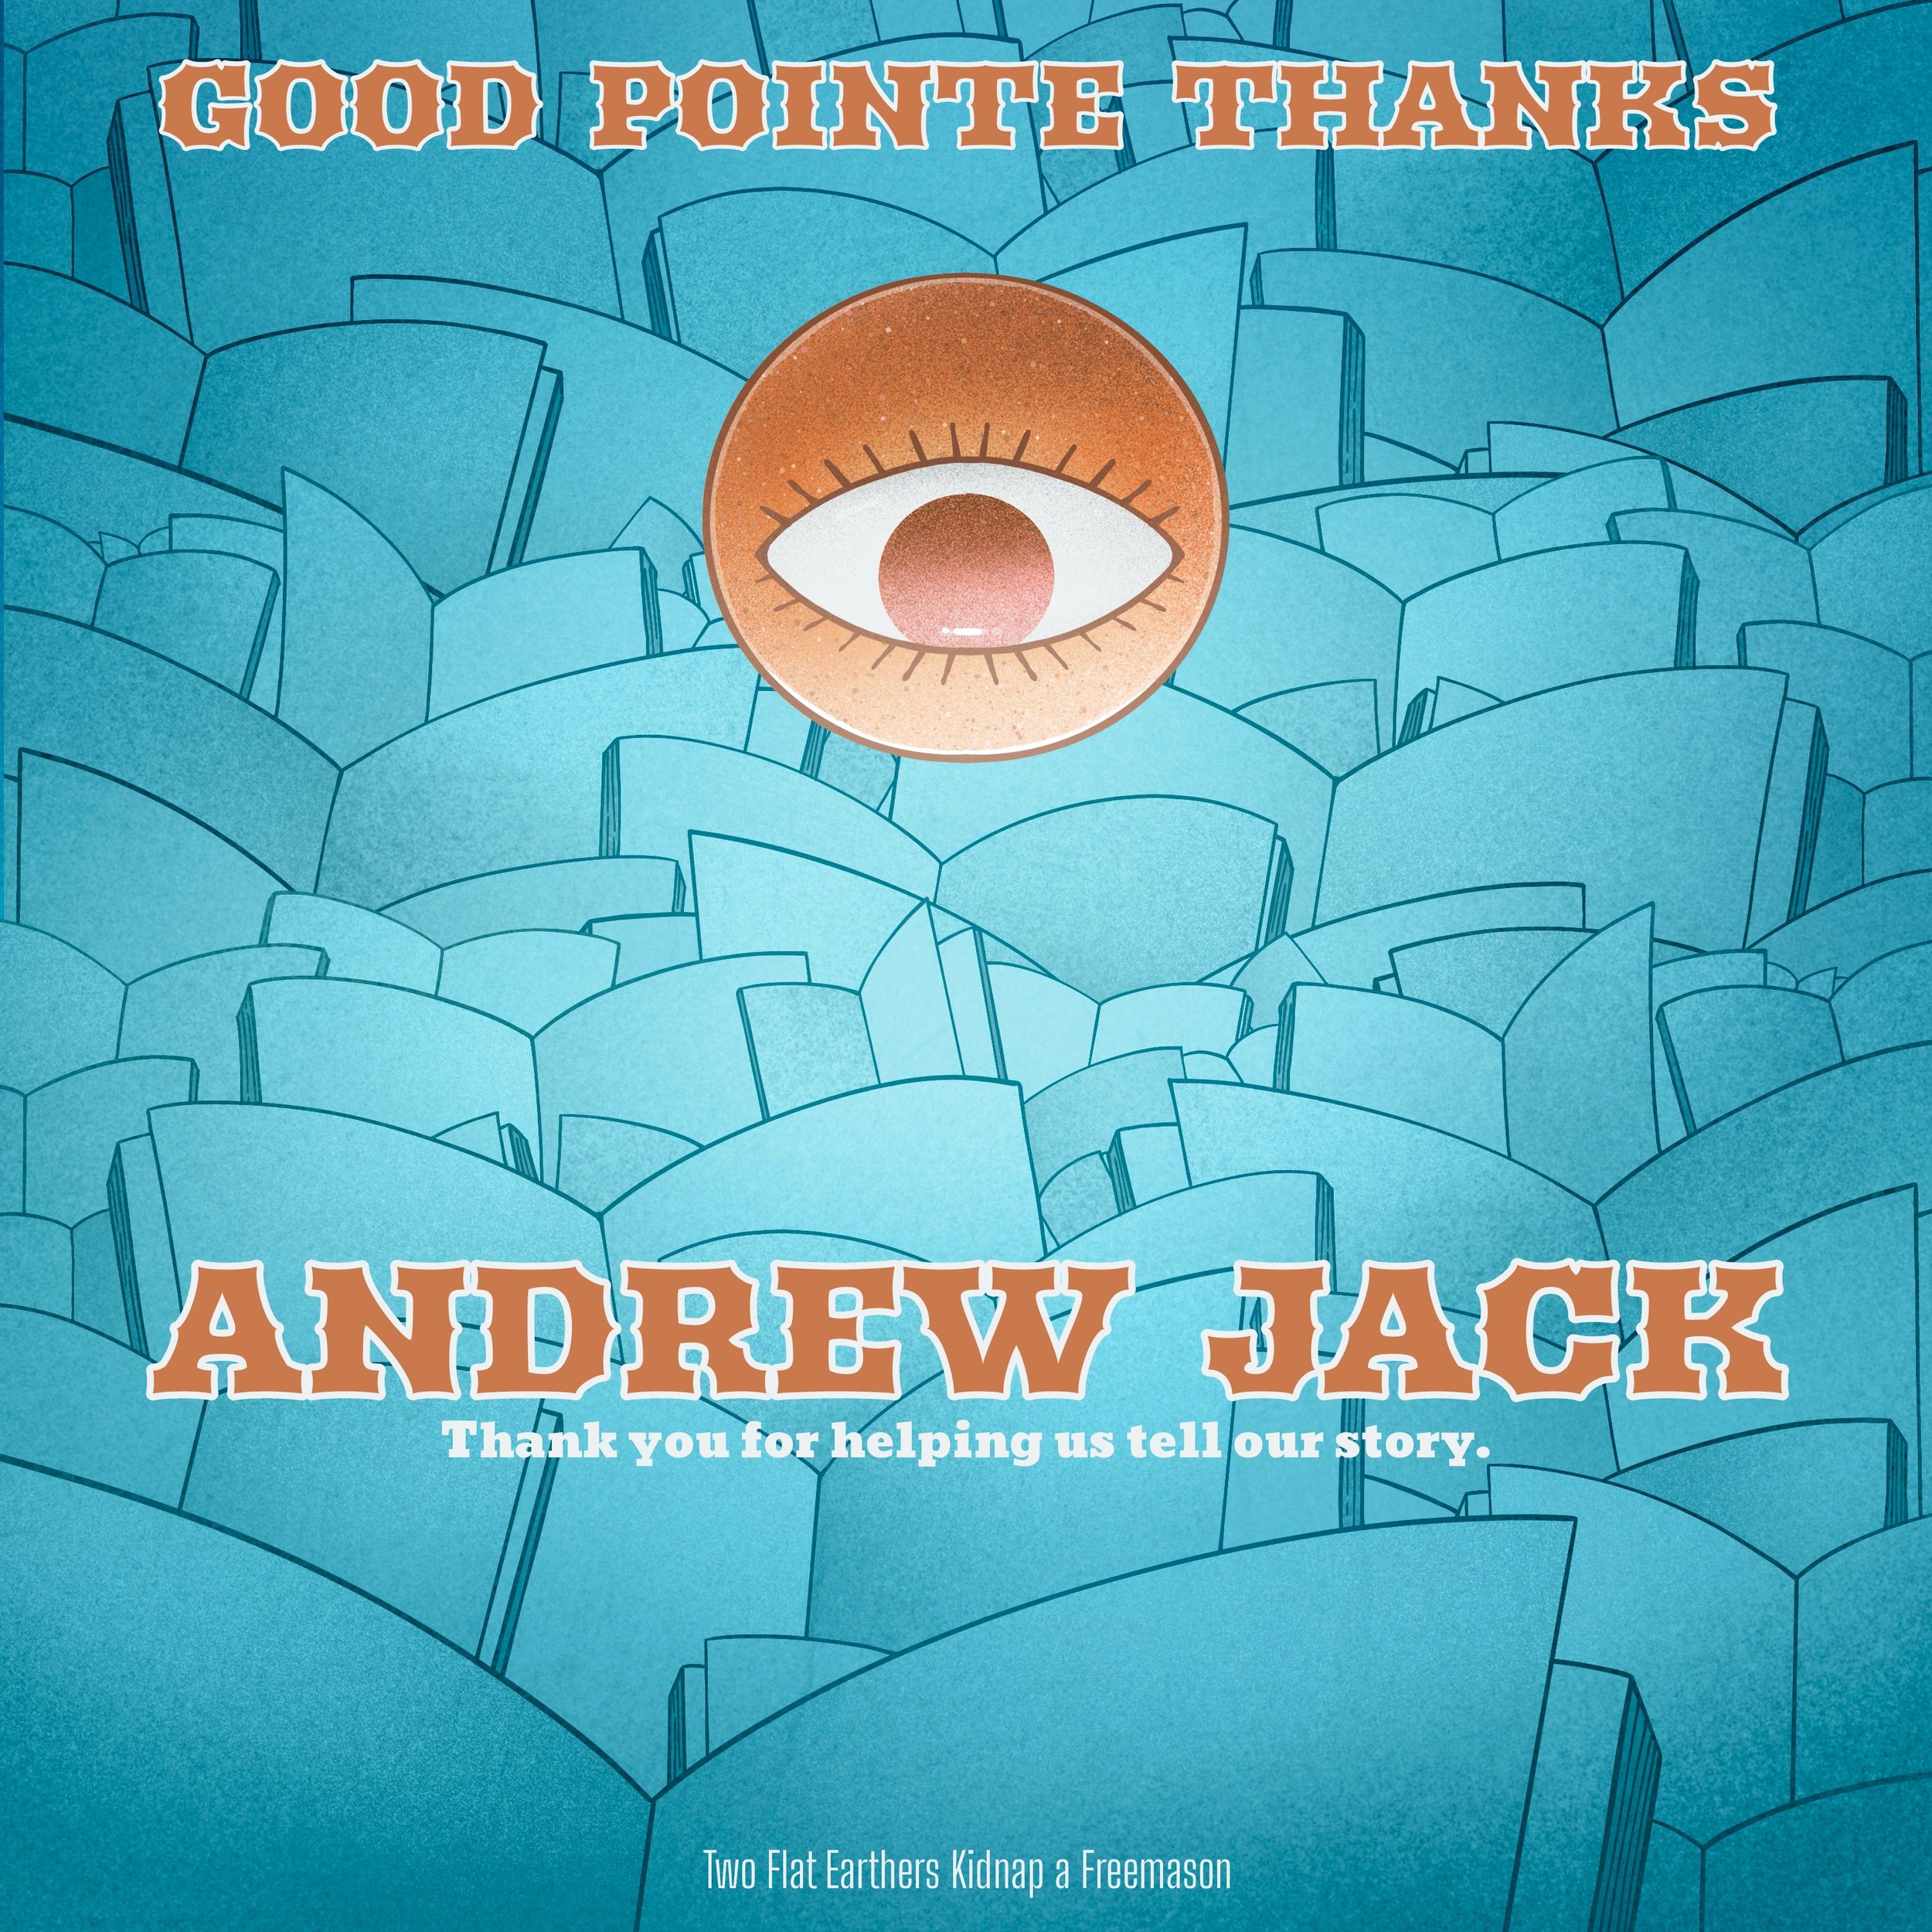 Thank You Messages - ANDREW JACK.jpg